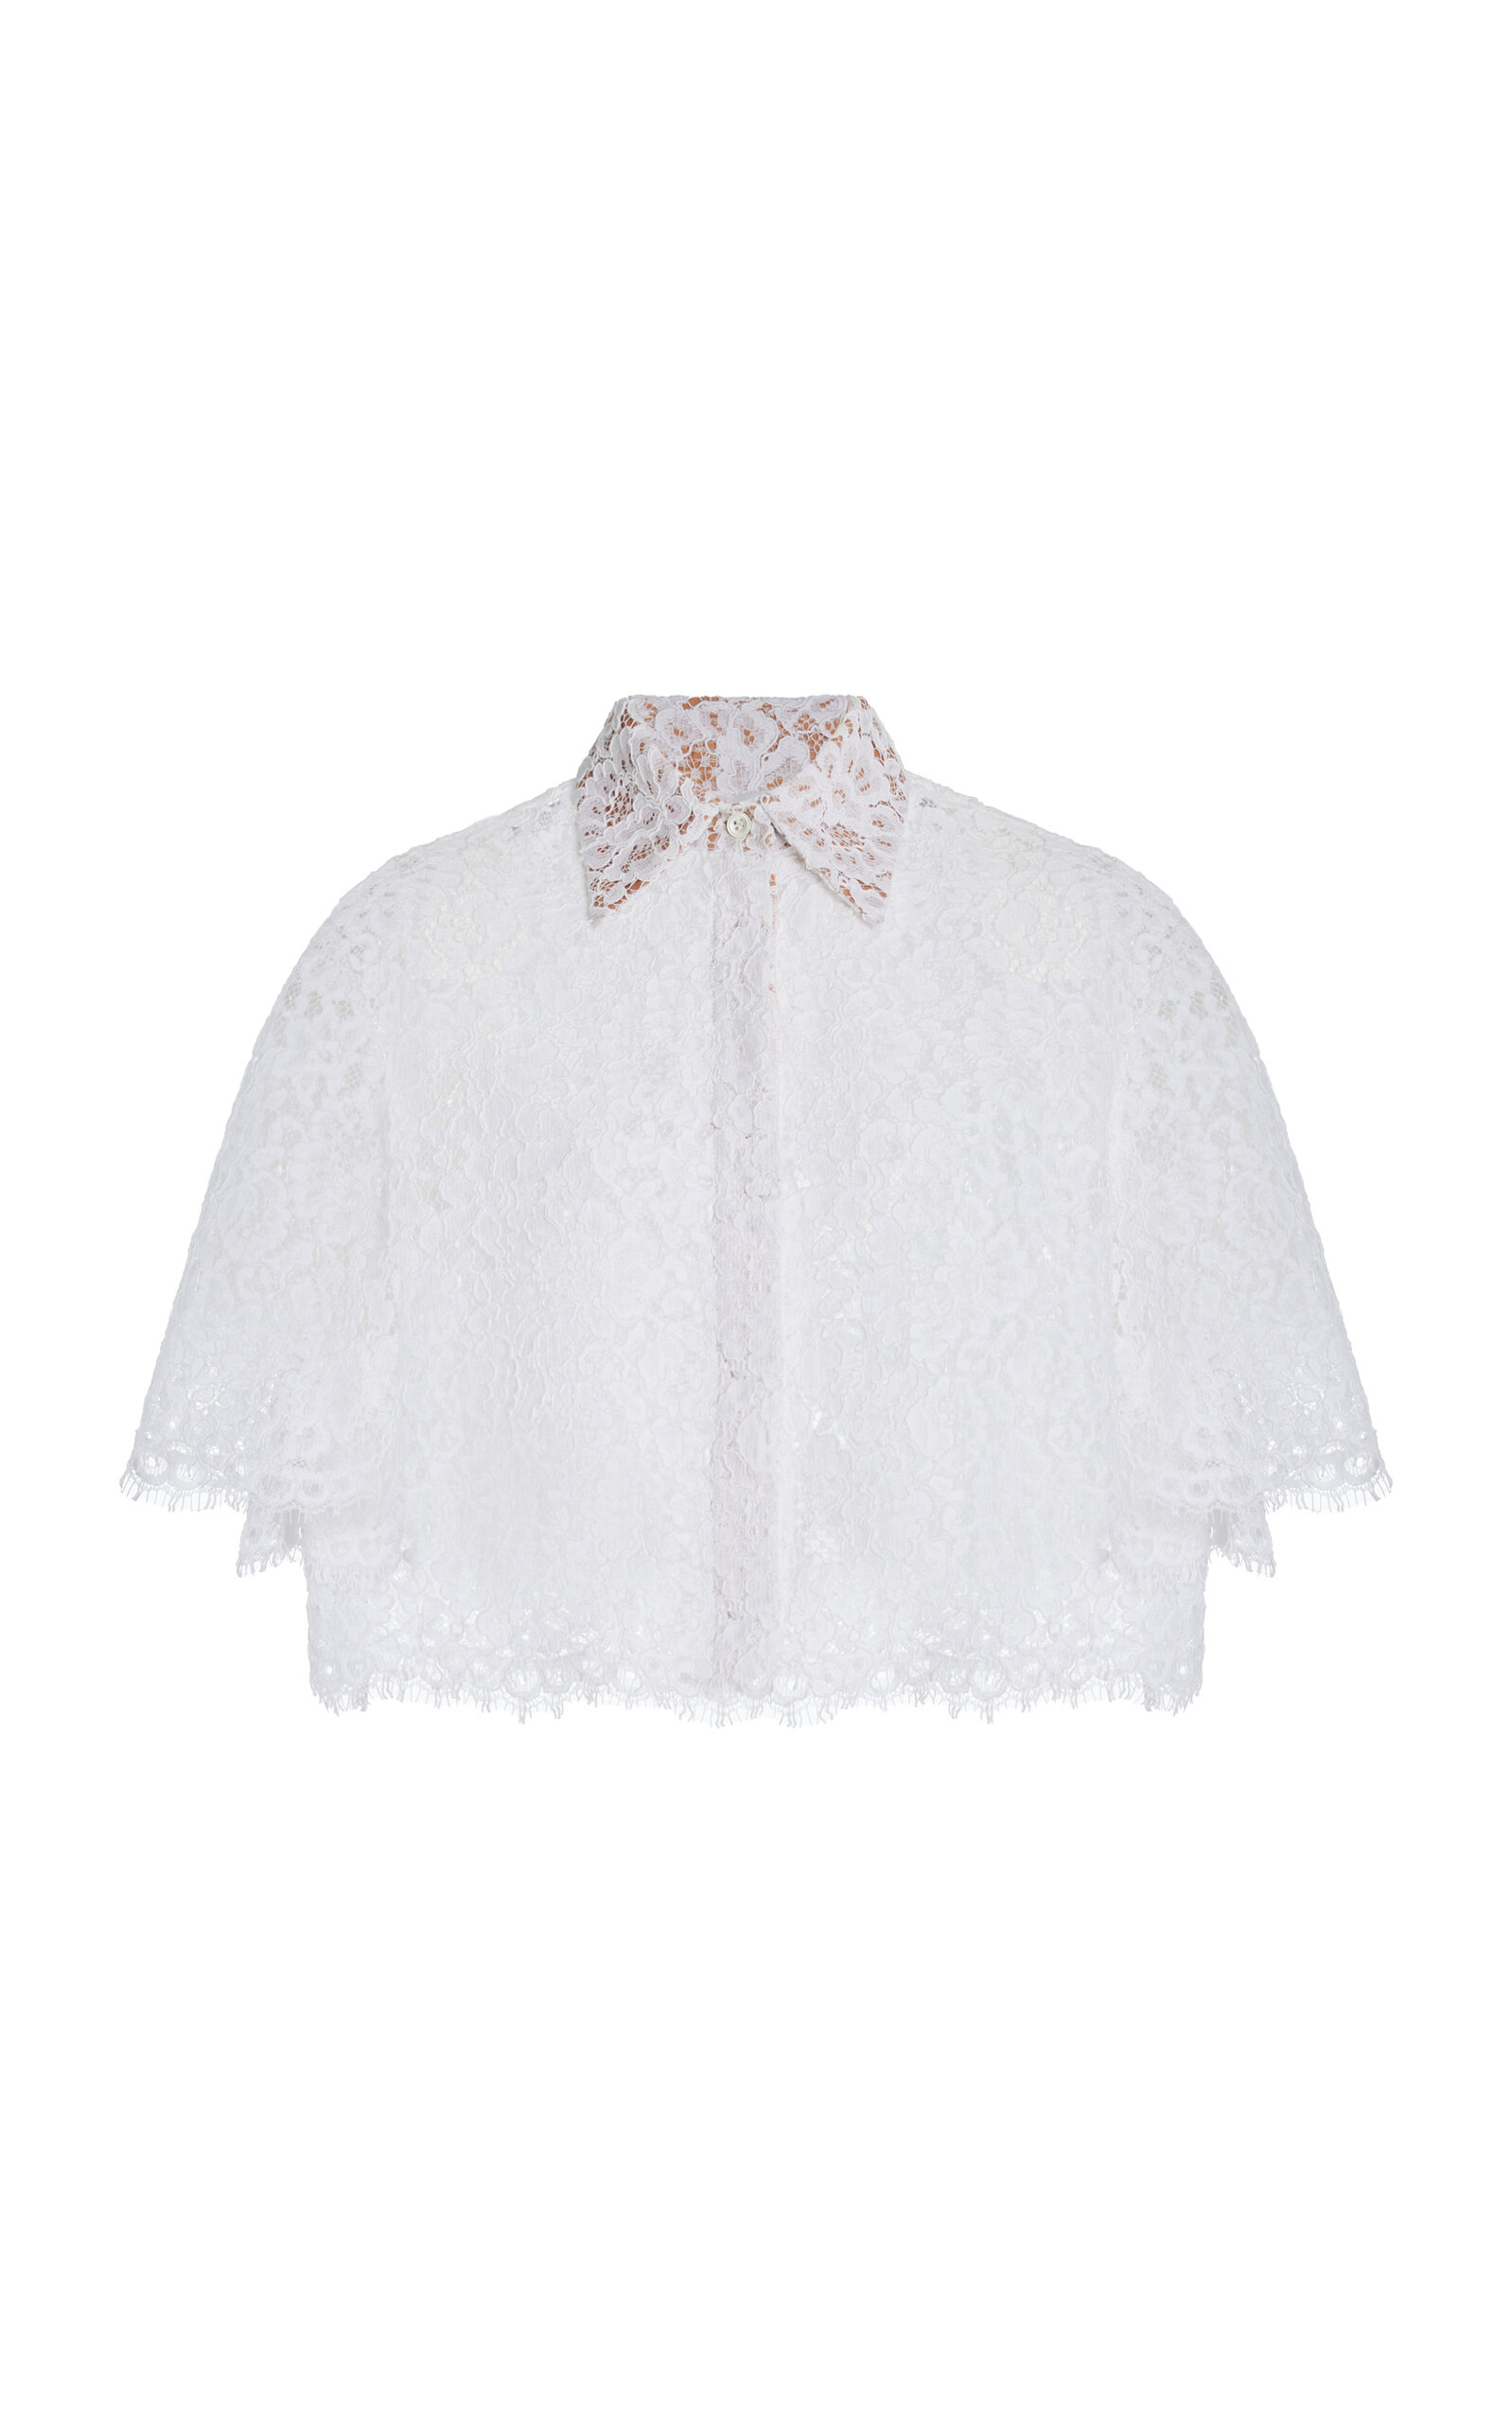 Michael Kors Cropped Lace Shirt In White